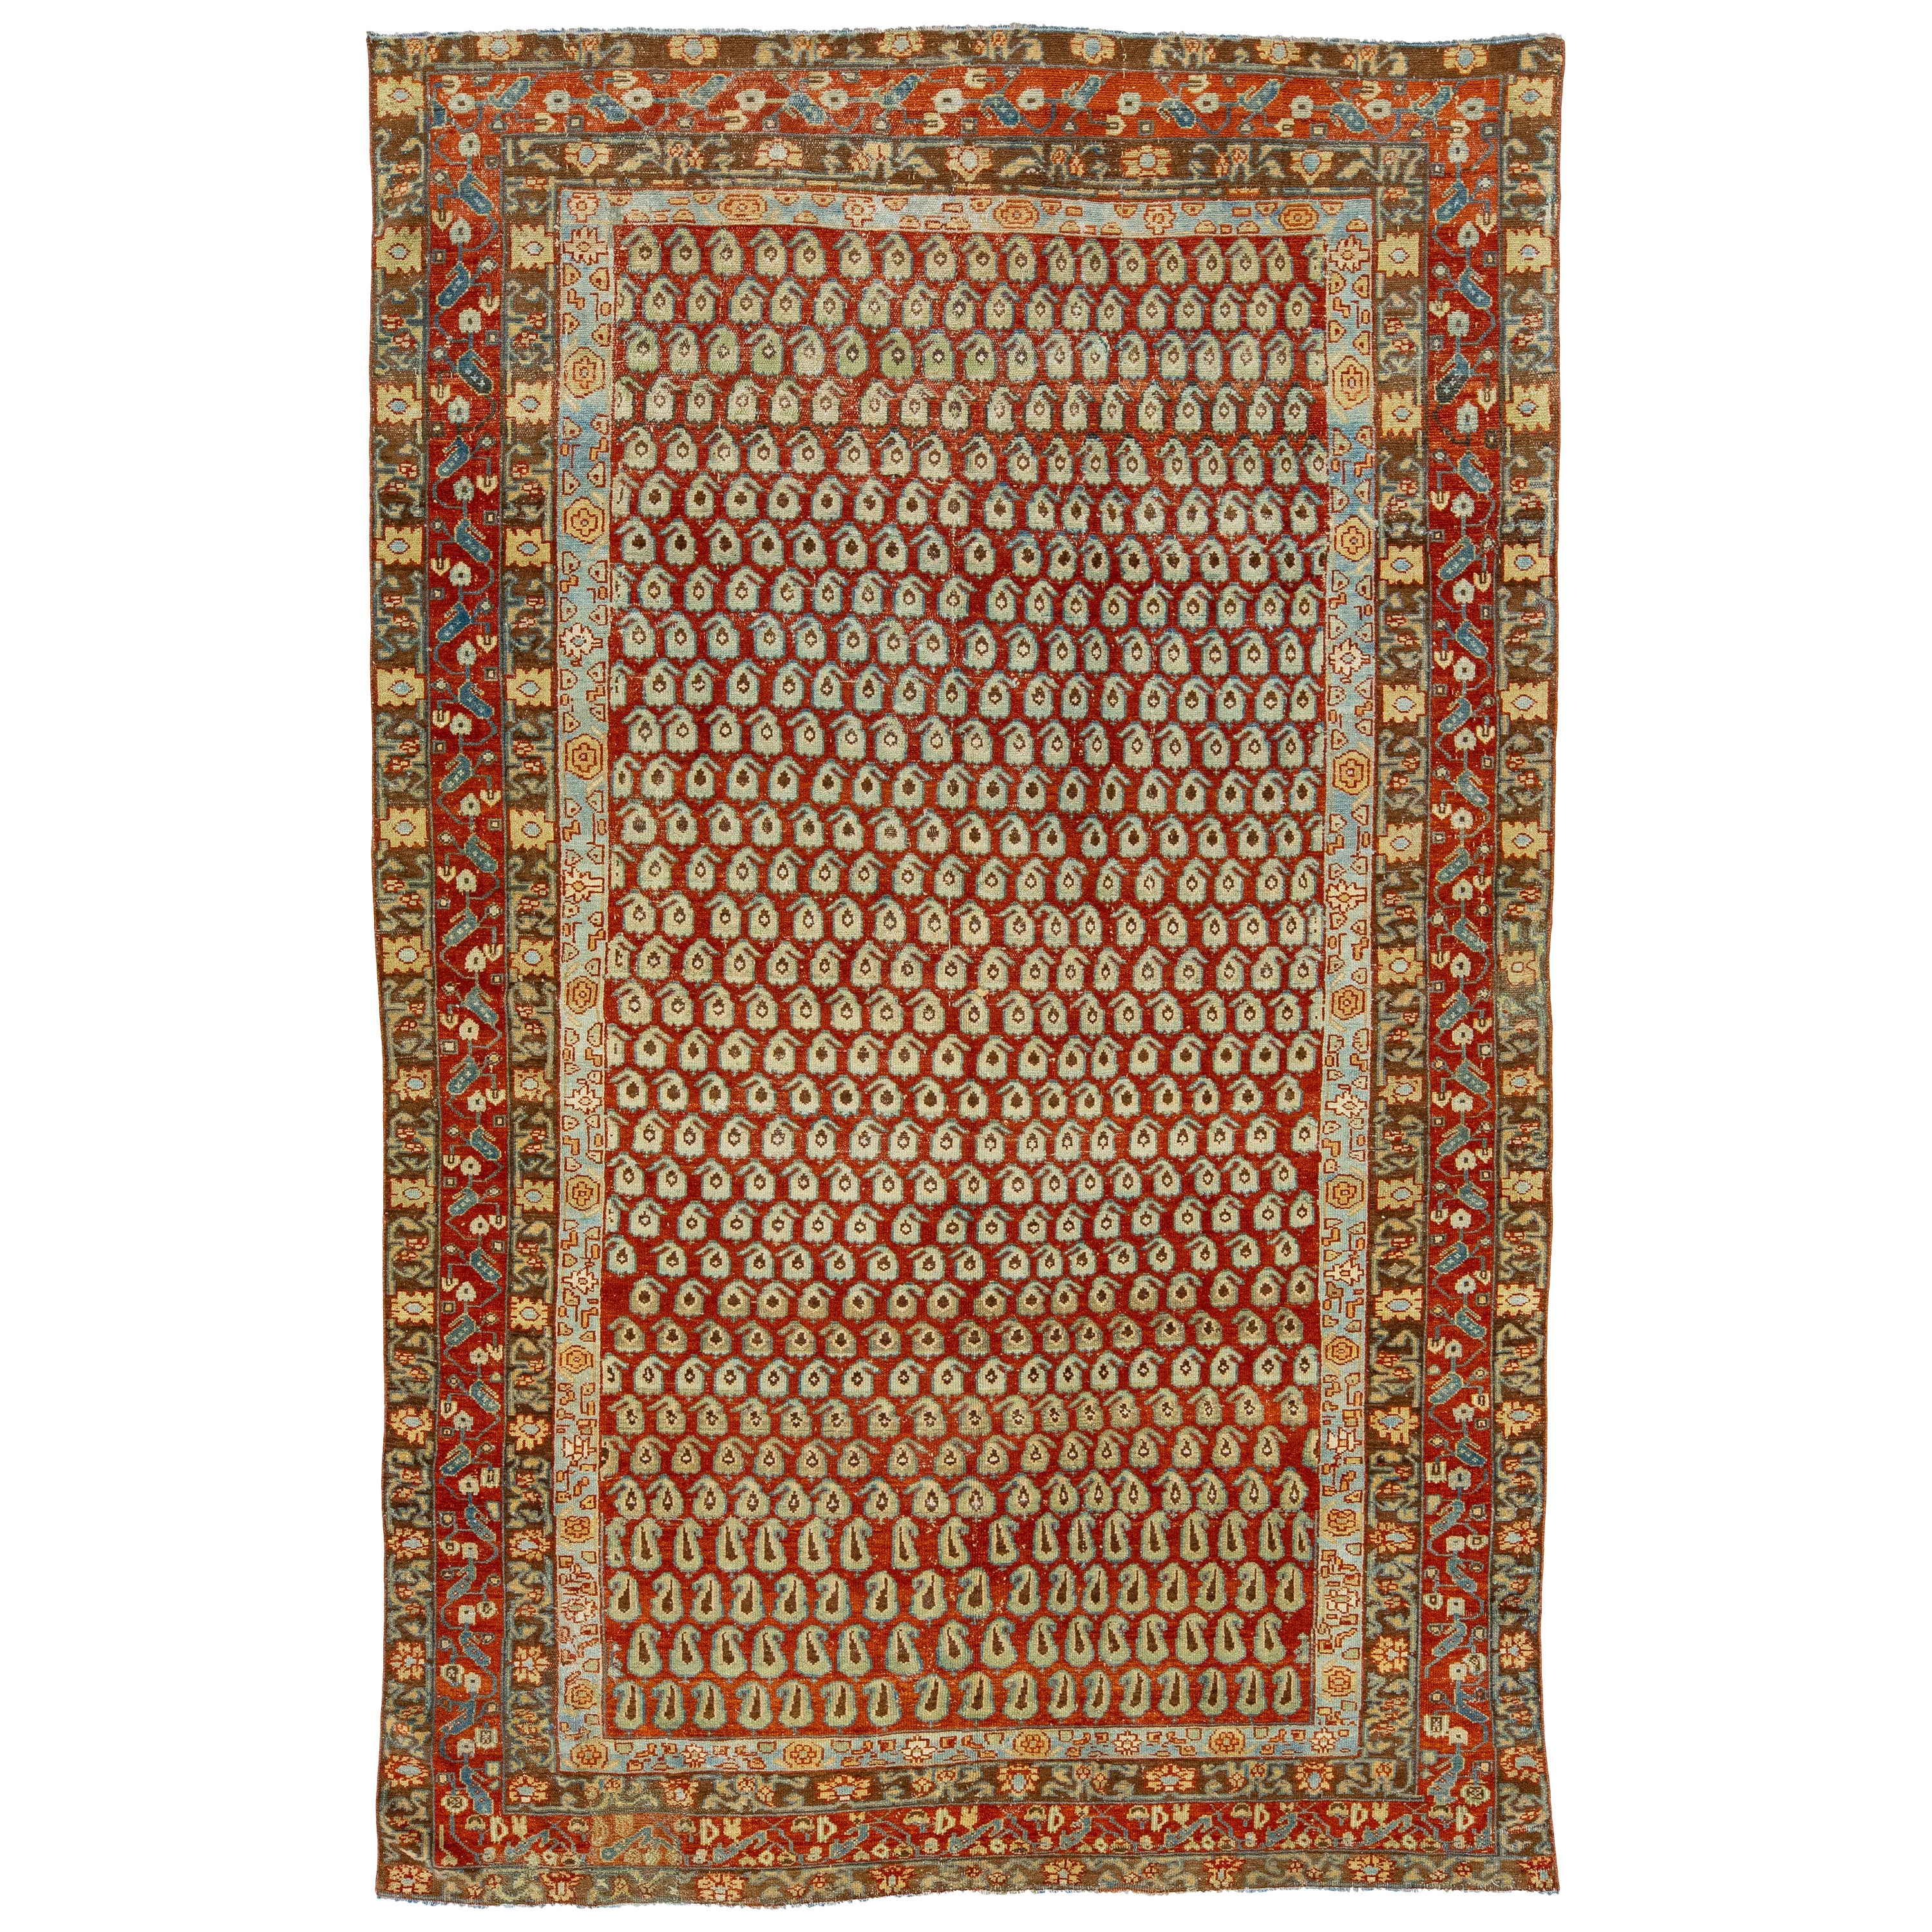 Allover Designed Antique Hamadan Persian Wool Rug In Red-Rust Color For Sale